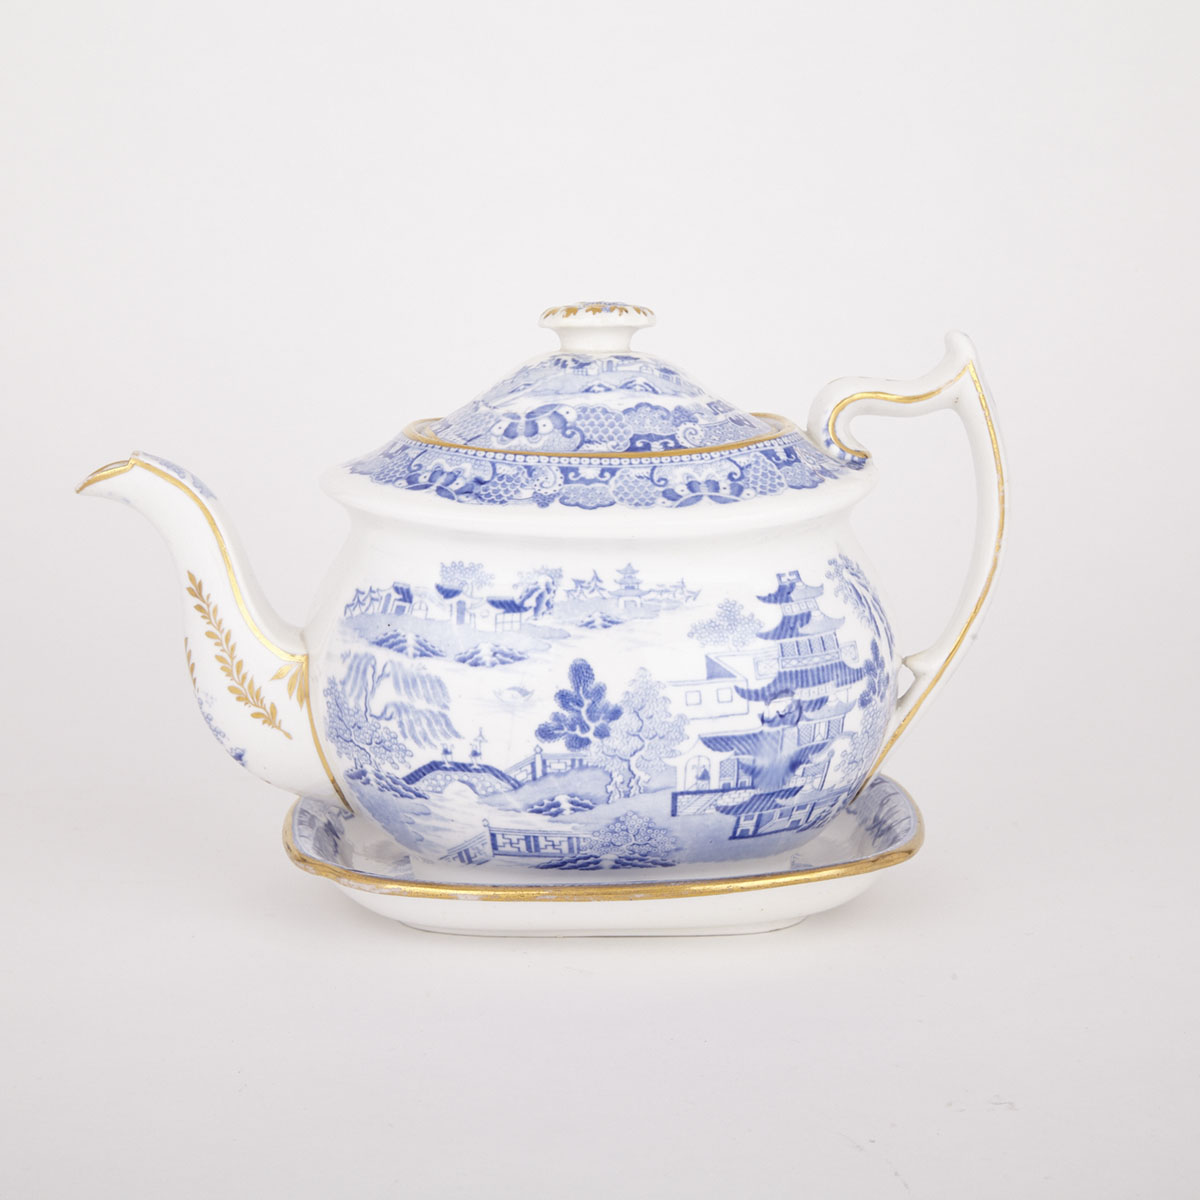 Ratcliffe Blue Printed Teapot and Stand, c.1831-40